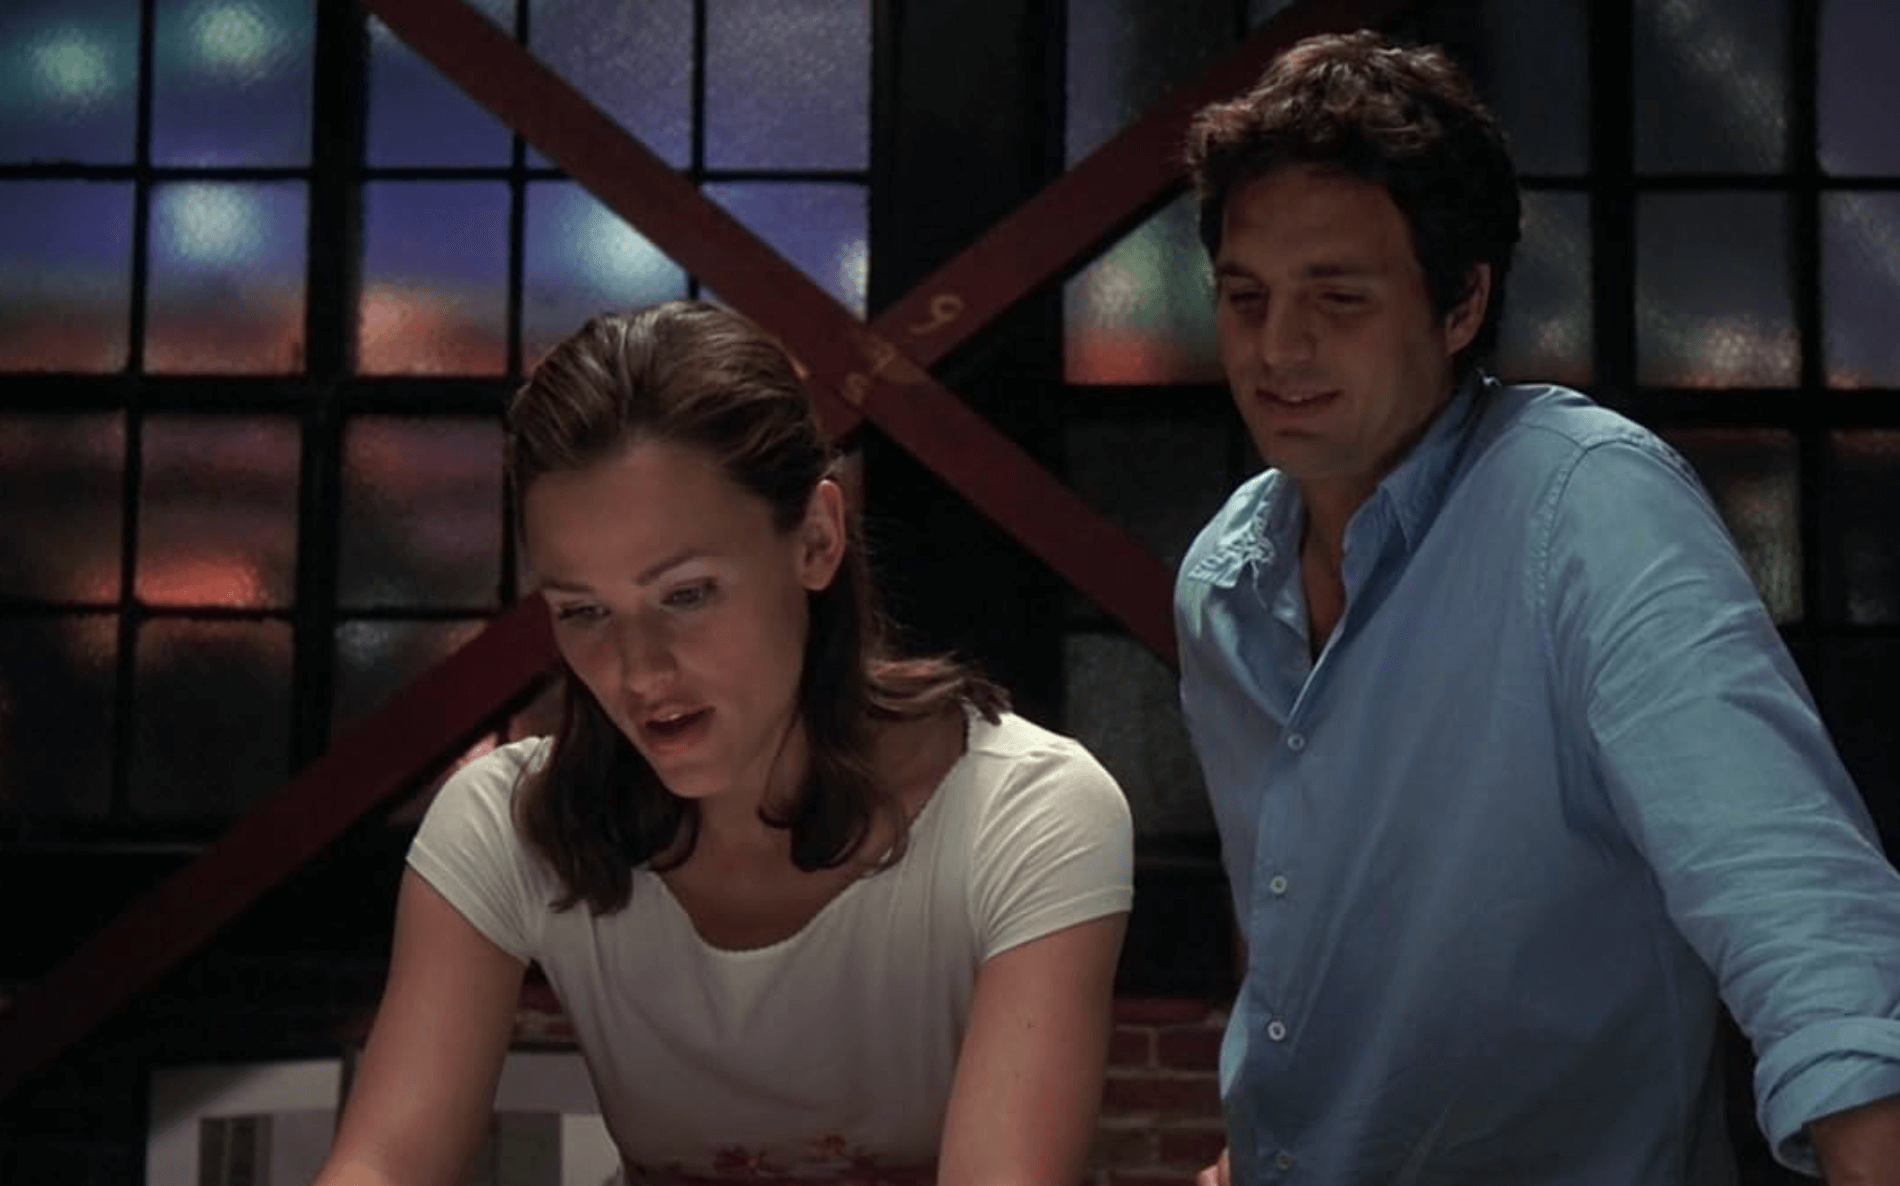 Jennifer Garner and Mark Ruffalo share an inimitably sweet chemistry as childhood-friends-turned-lovers in “13 Going on 30”